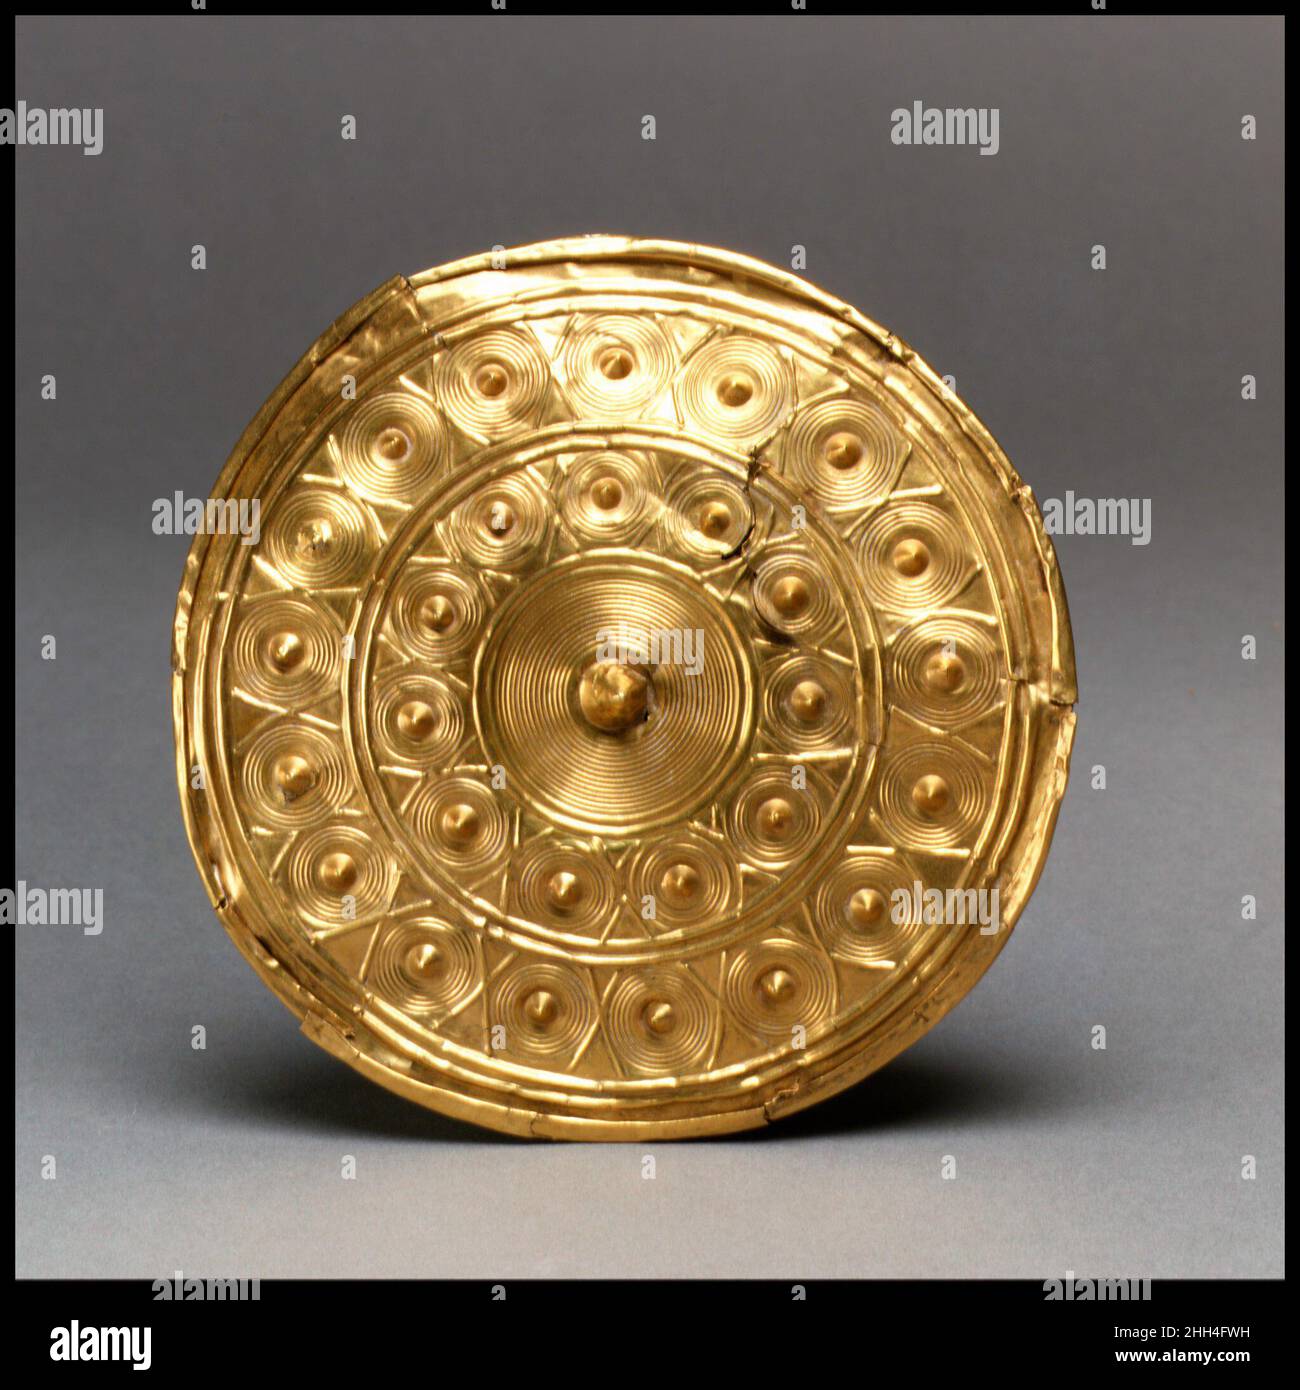 Disk from a Reel ca. 800 B.C. Irish Ireland experienced a period of  resurgence in the production of goldwork during the late Bronze Age.  Numerous objects noteworthy for their gold content, innovative